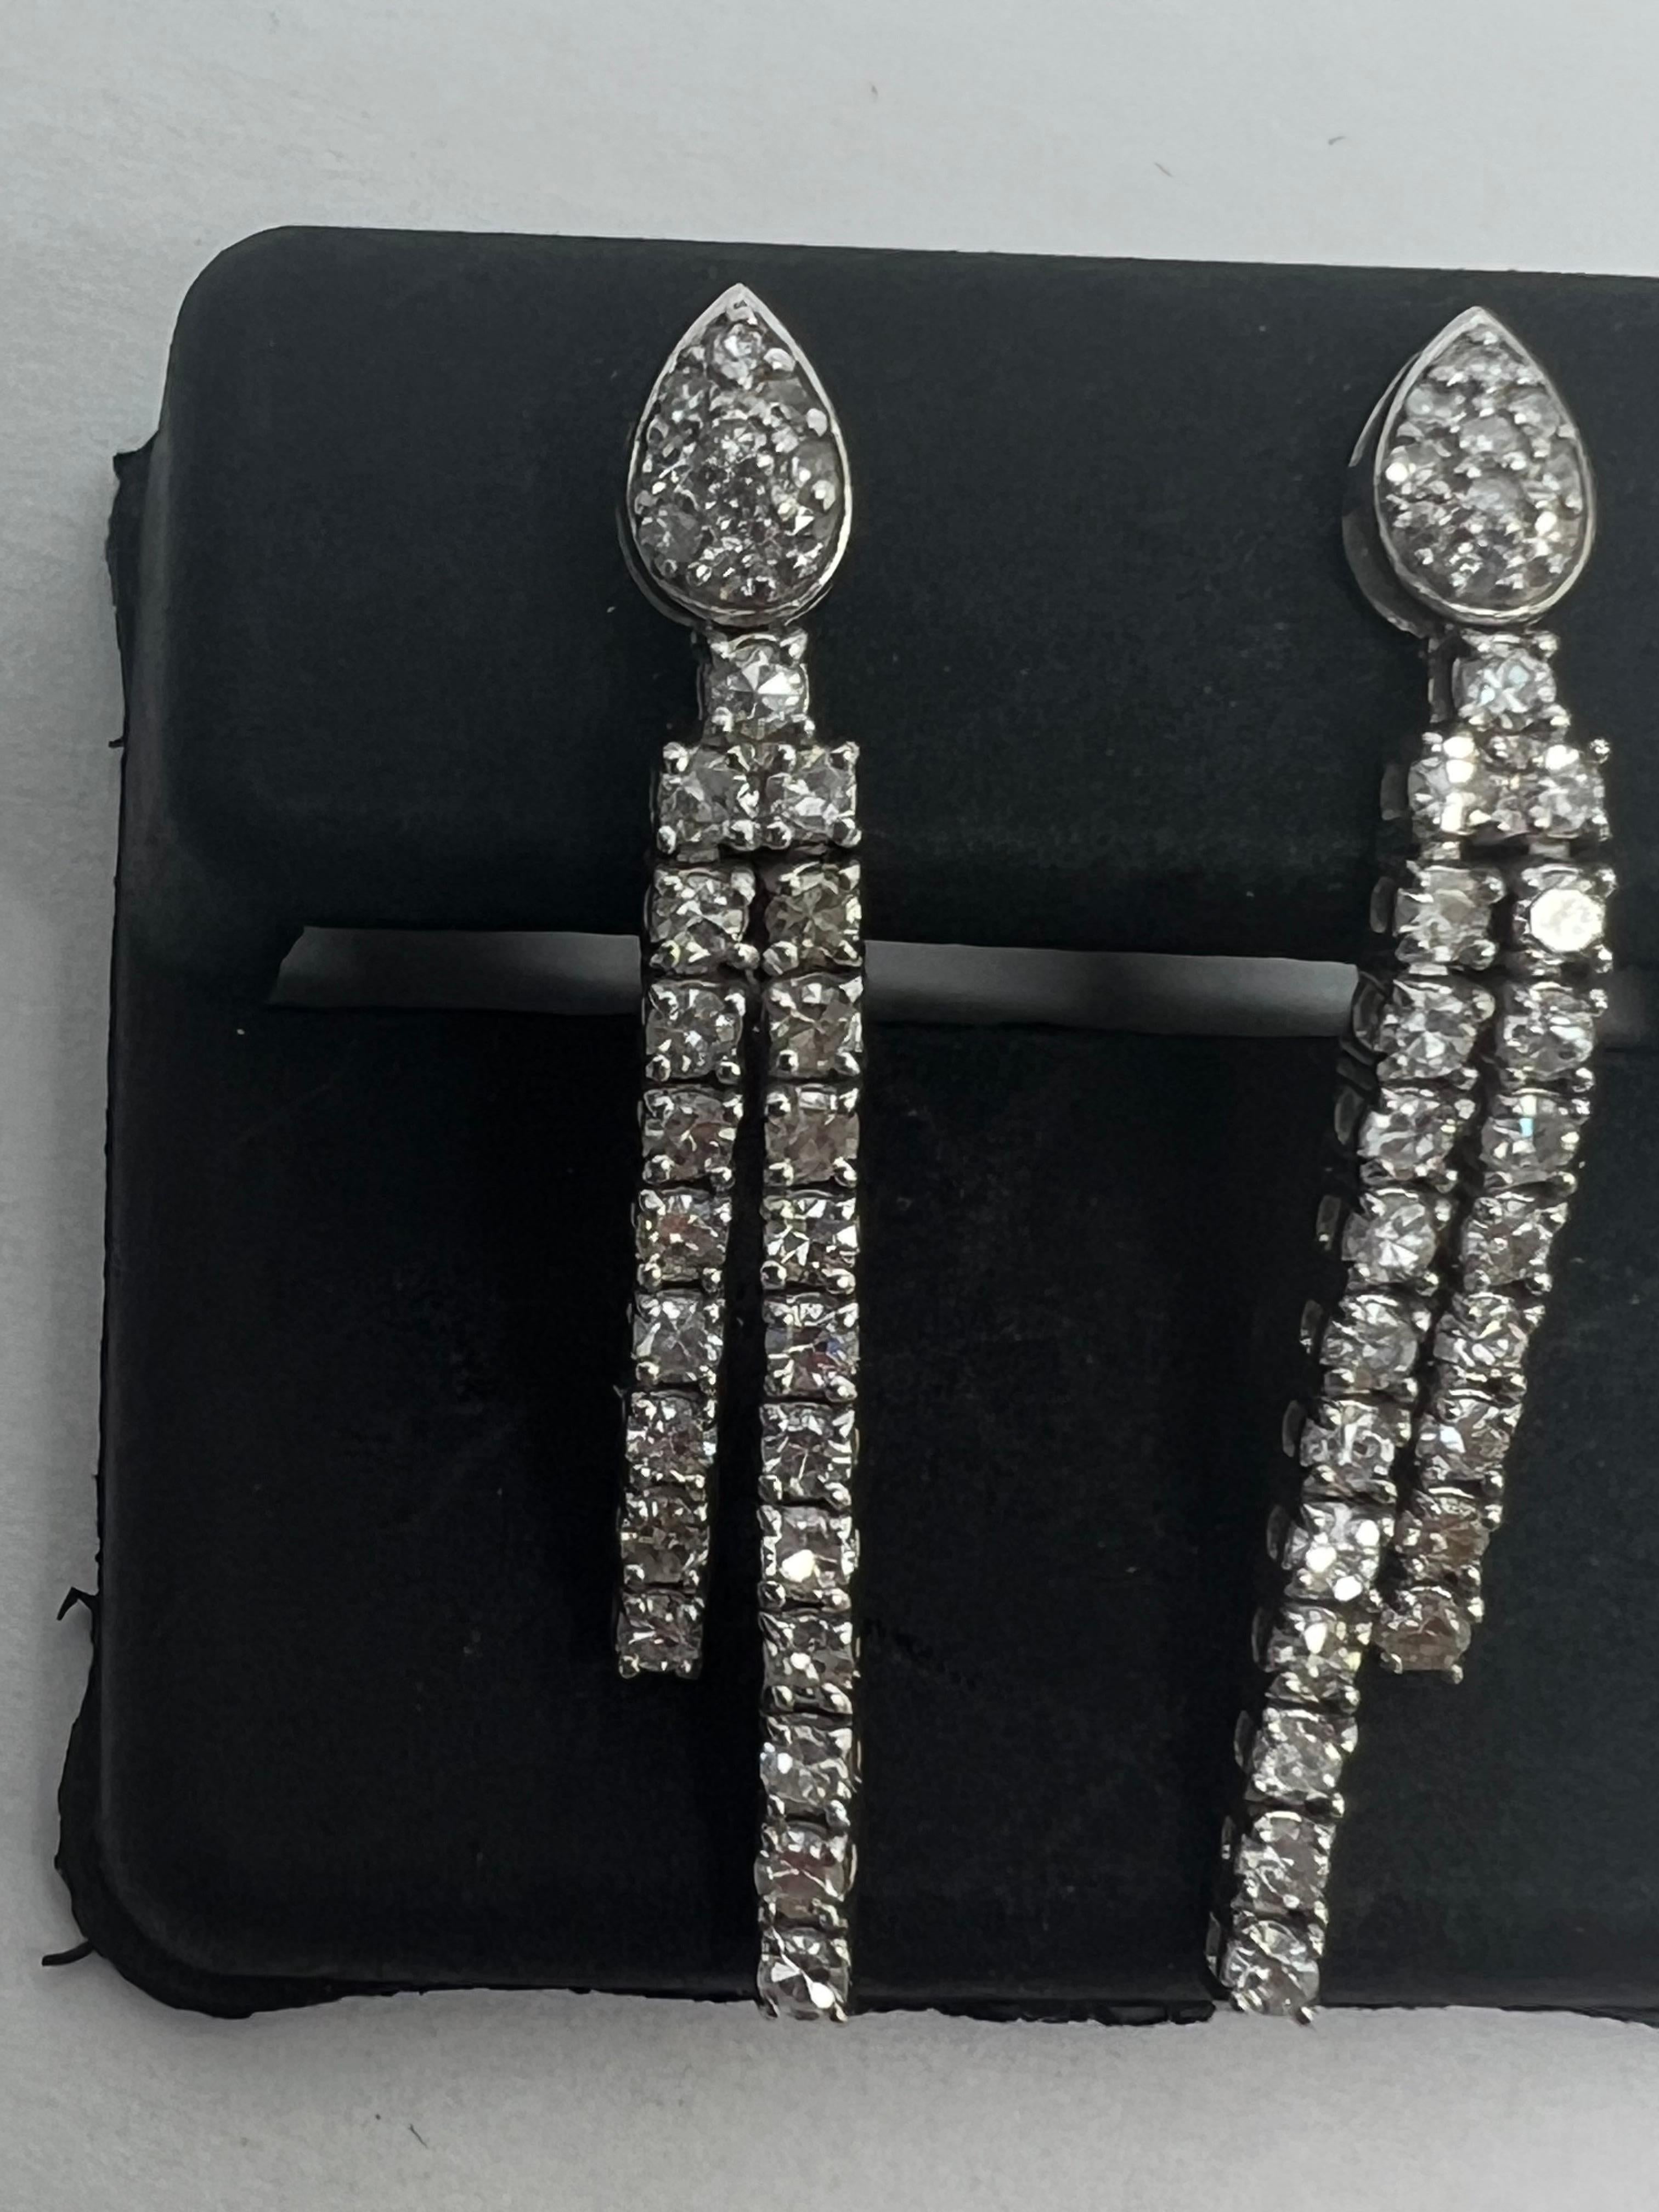 Add a touch of elegance to your outfit with these stunning 14k White Gold Diamond Pave Prong Drop Dangle Pear Earrings. The teardrop shape with a round diamond at the center adds a natural and timeless beauty to its design. The prong setting style